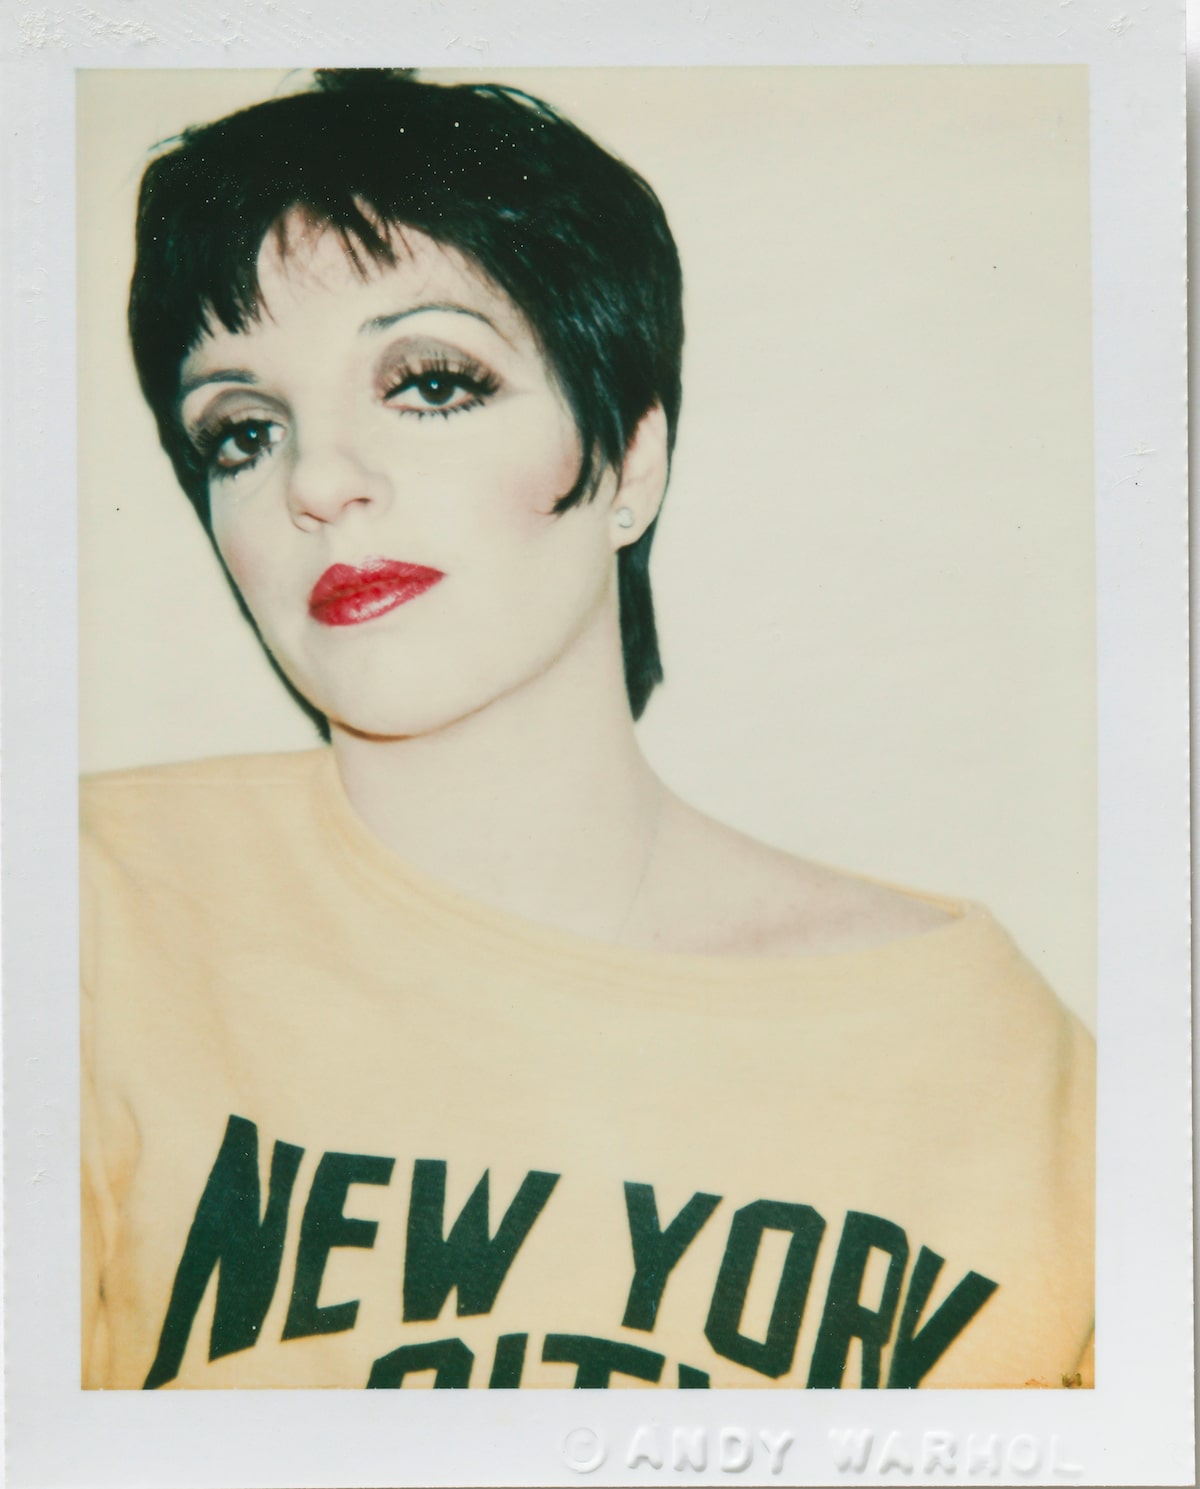 Andy Warhol's Iconic Polaroid Portraits on Display in London